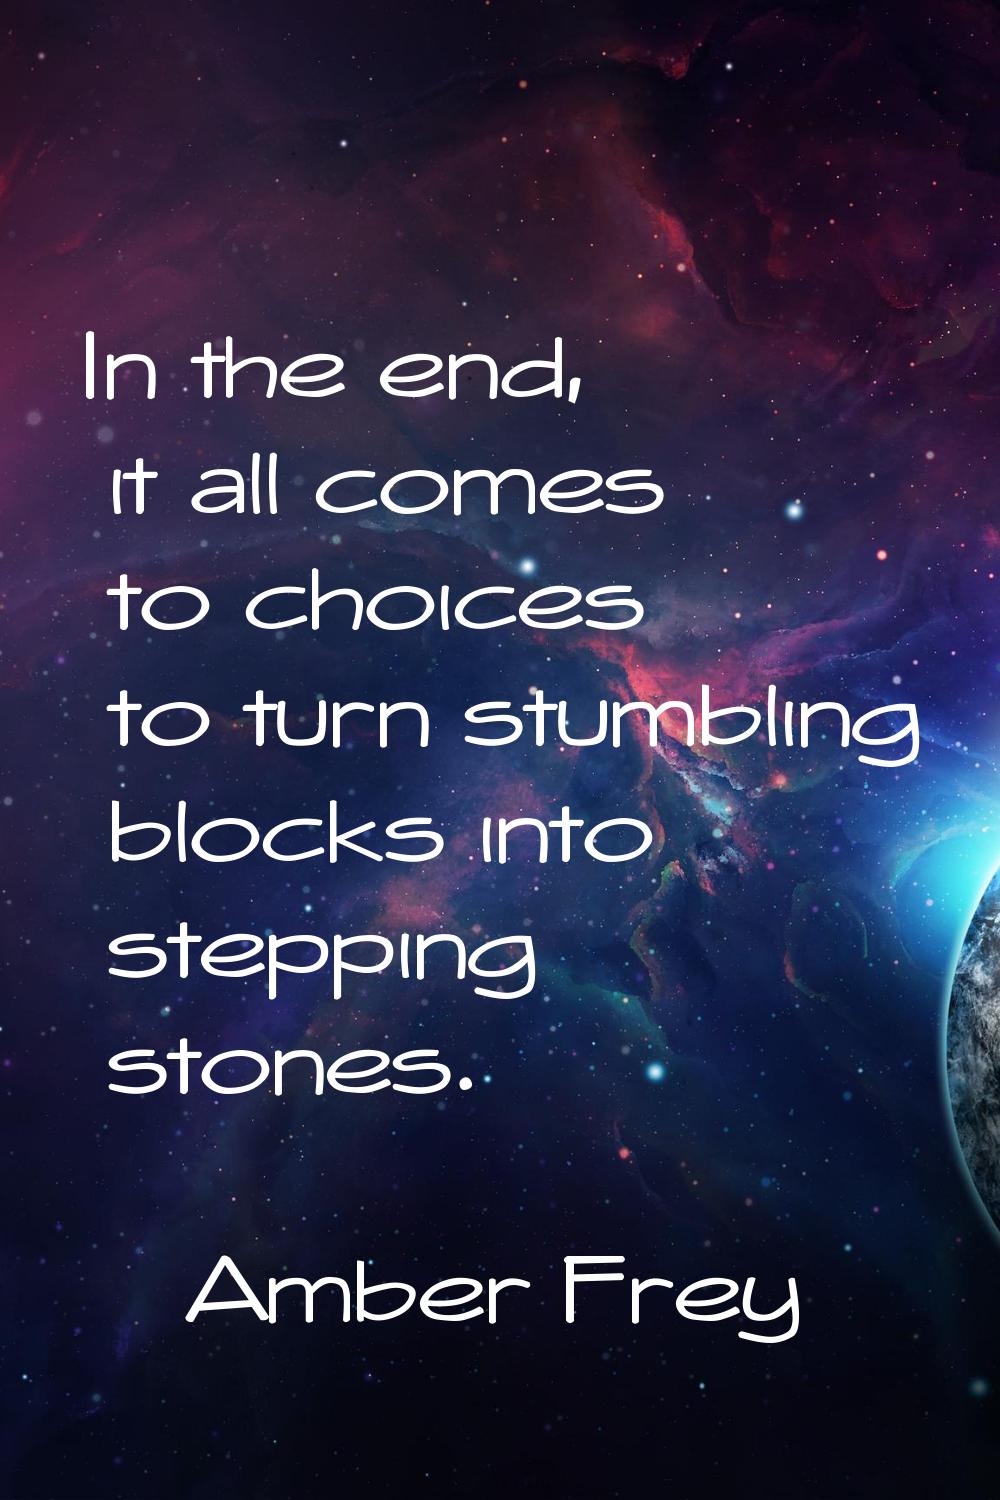 In the end, it all comes to choices to turn stumbling blocks into stepping stones.